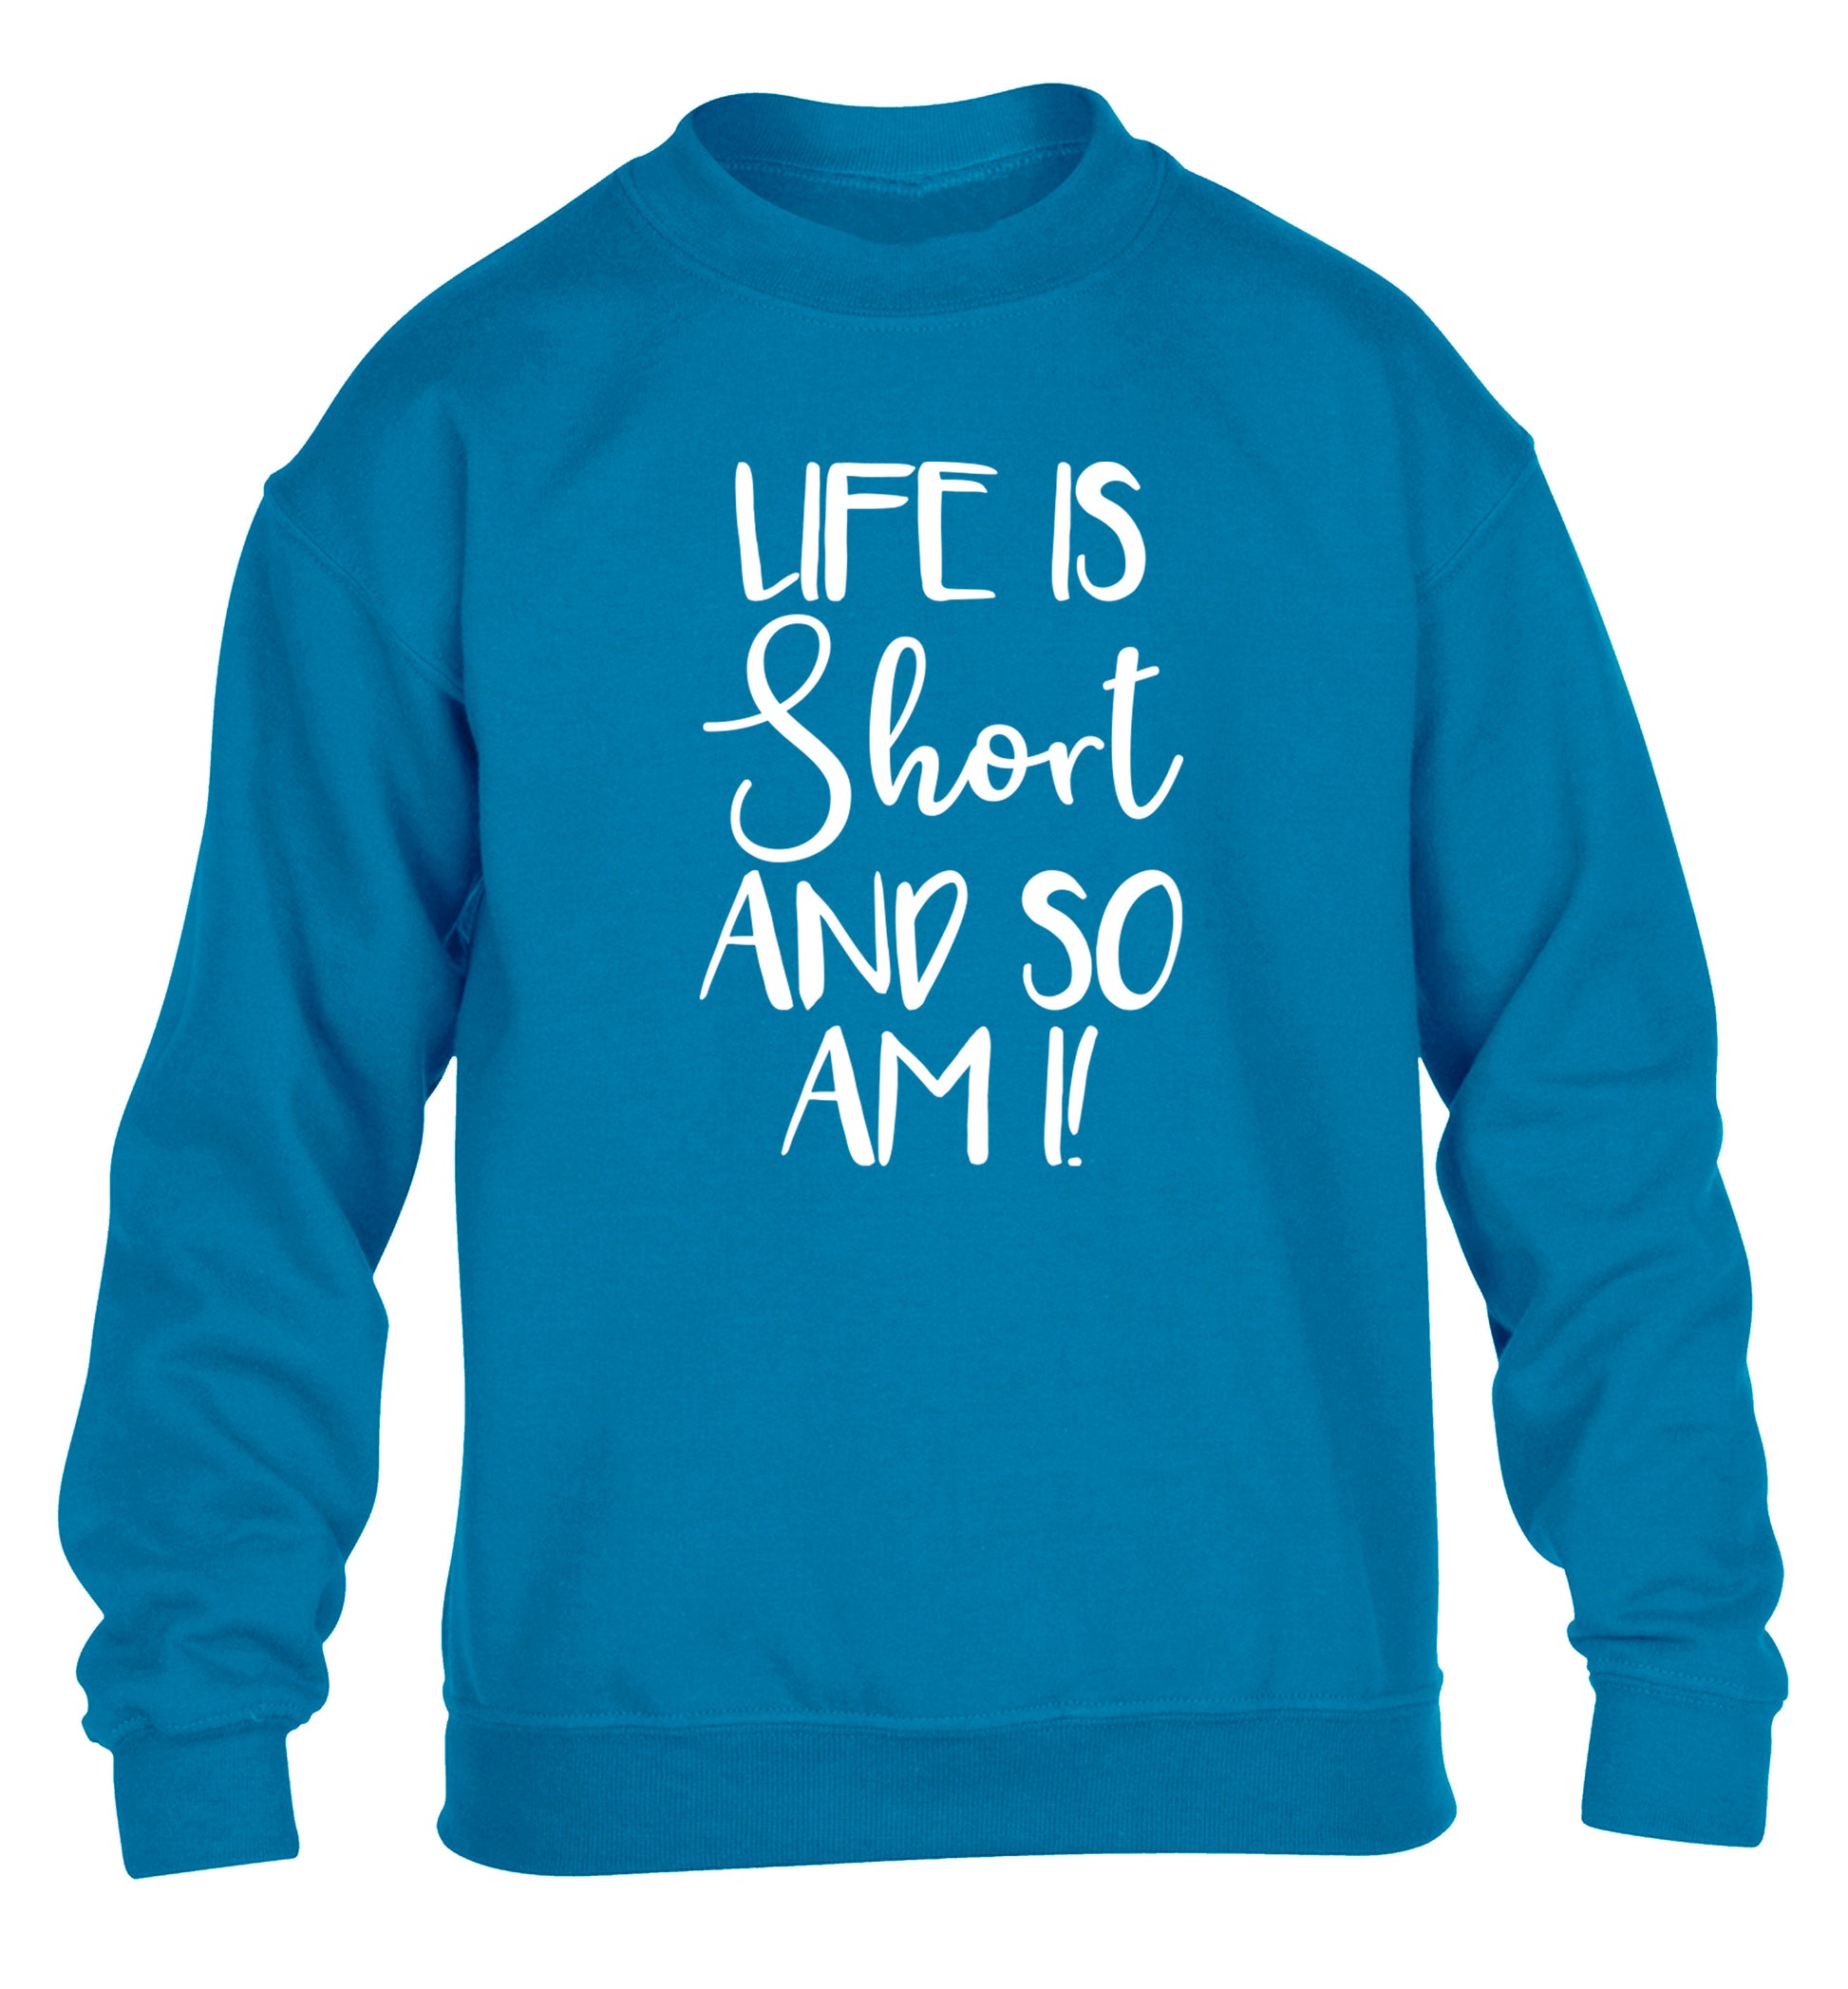 Life is short and so am I! children's blue sweater 12-13 Years